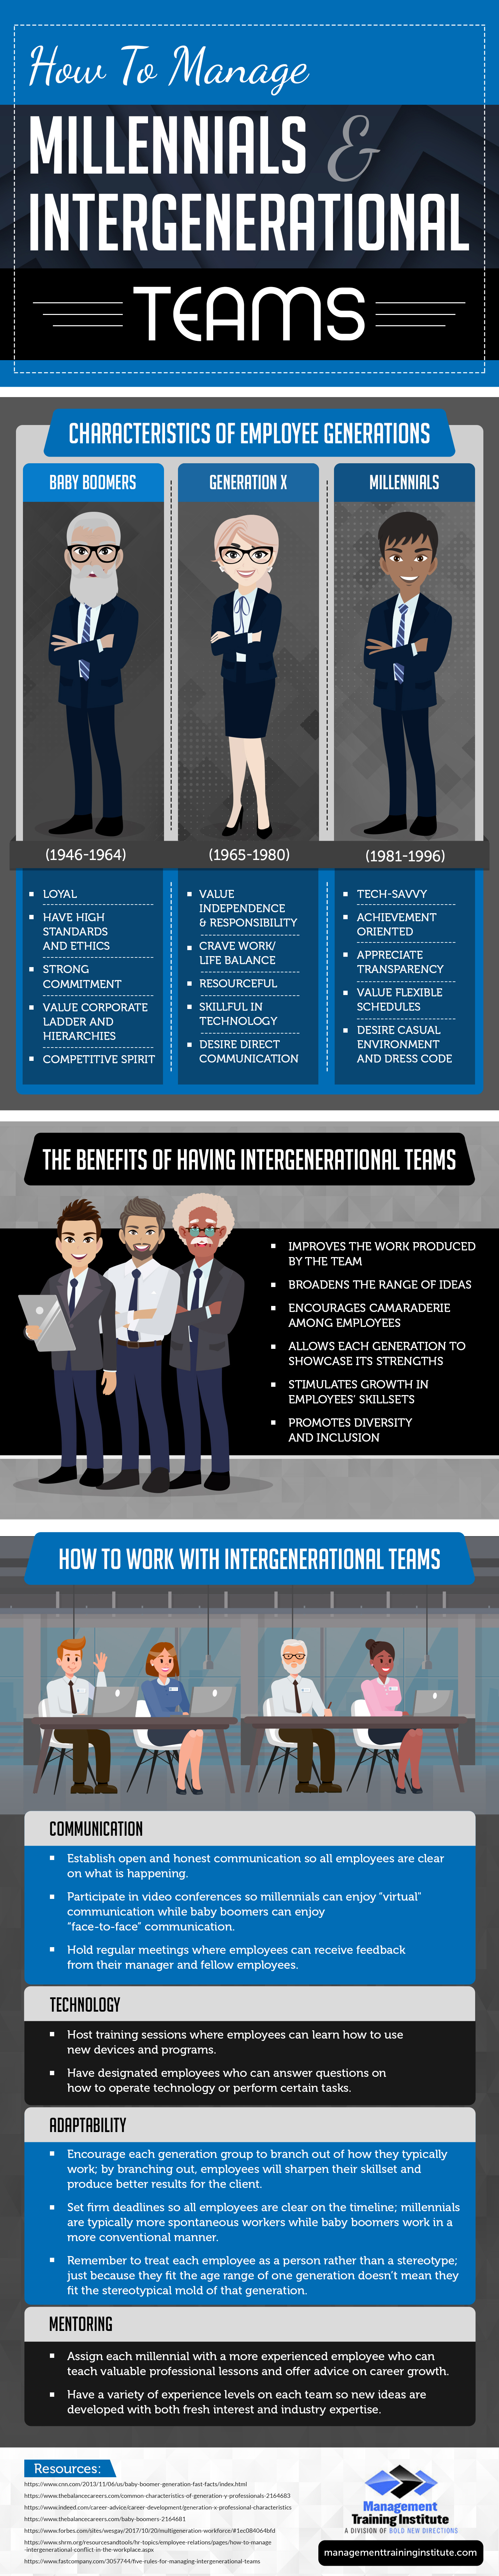 How to Manage Millennials and Intergenerational Teams